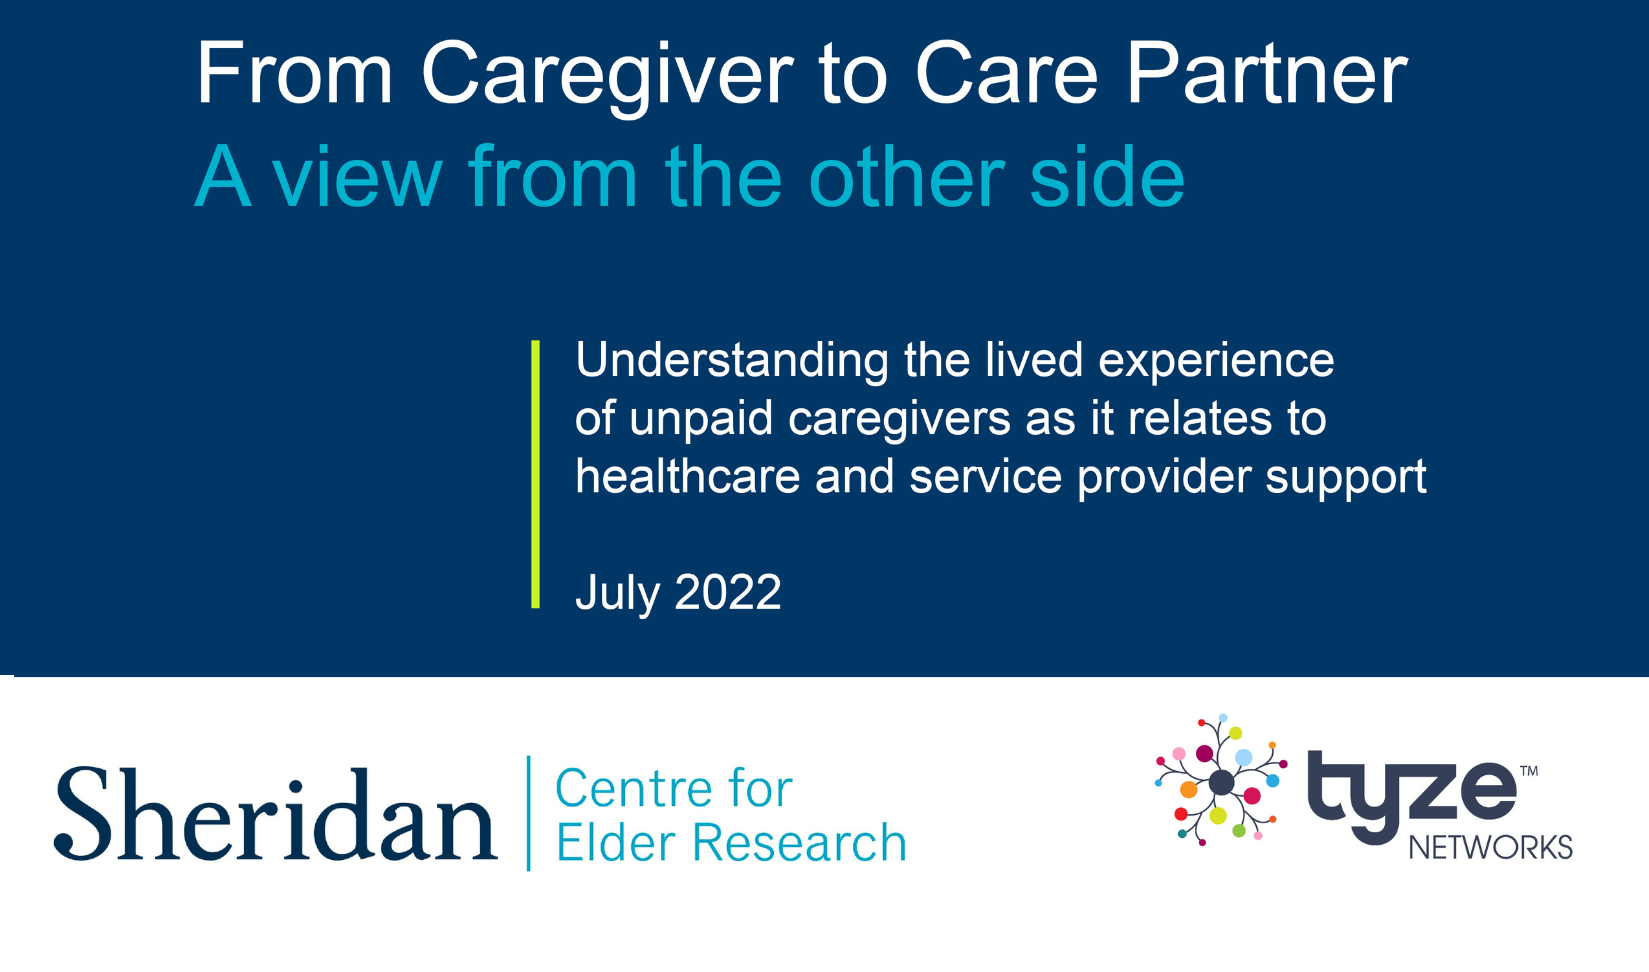 From Caregiver to Care Partner: A view from the other side